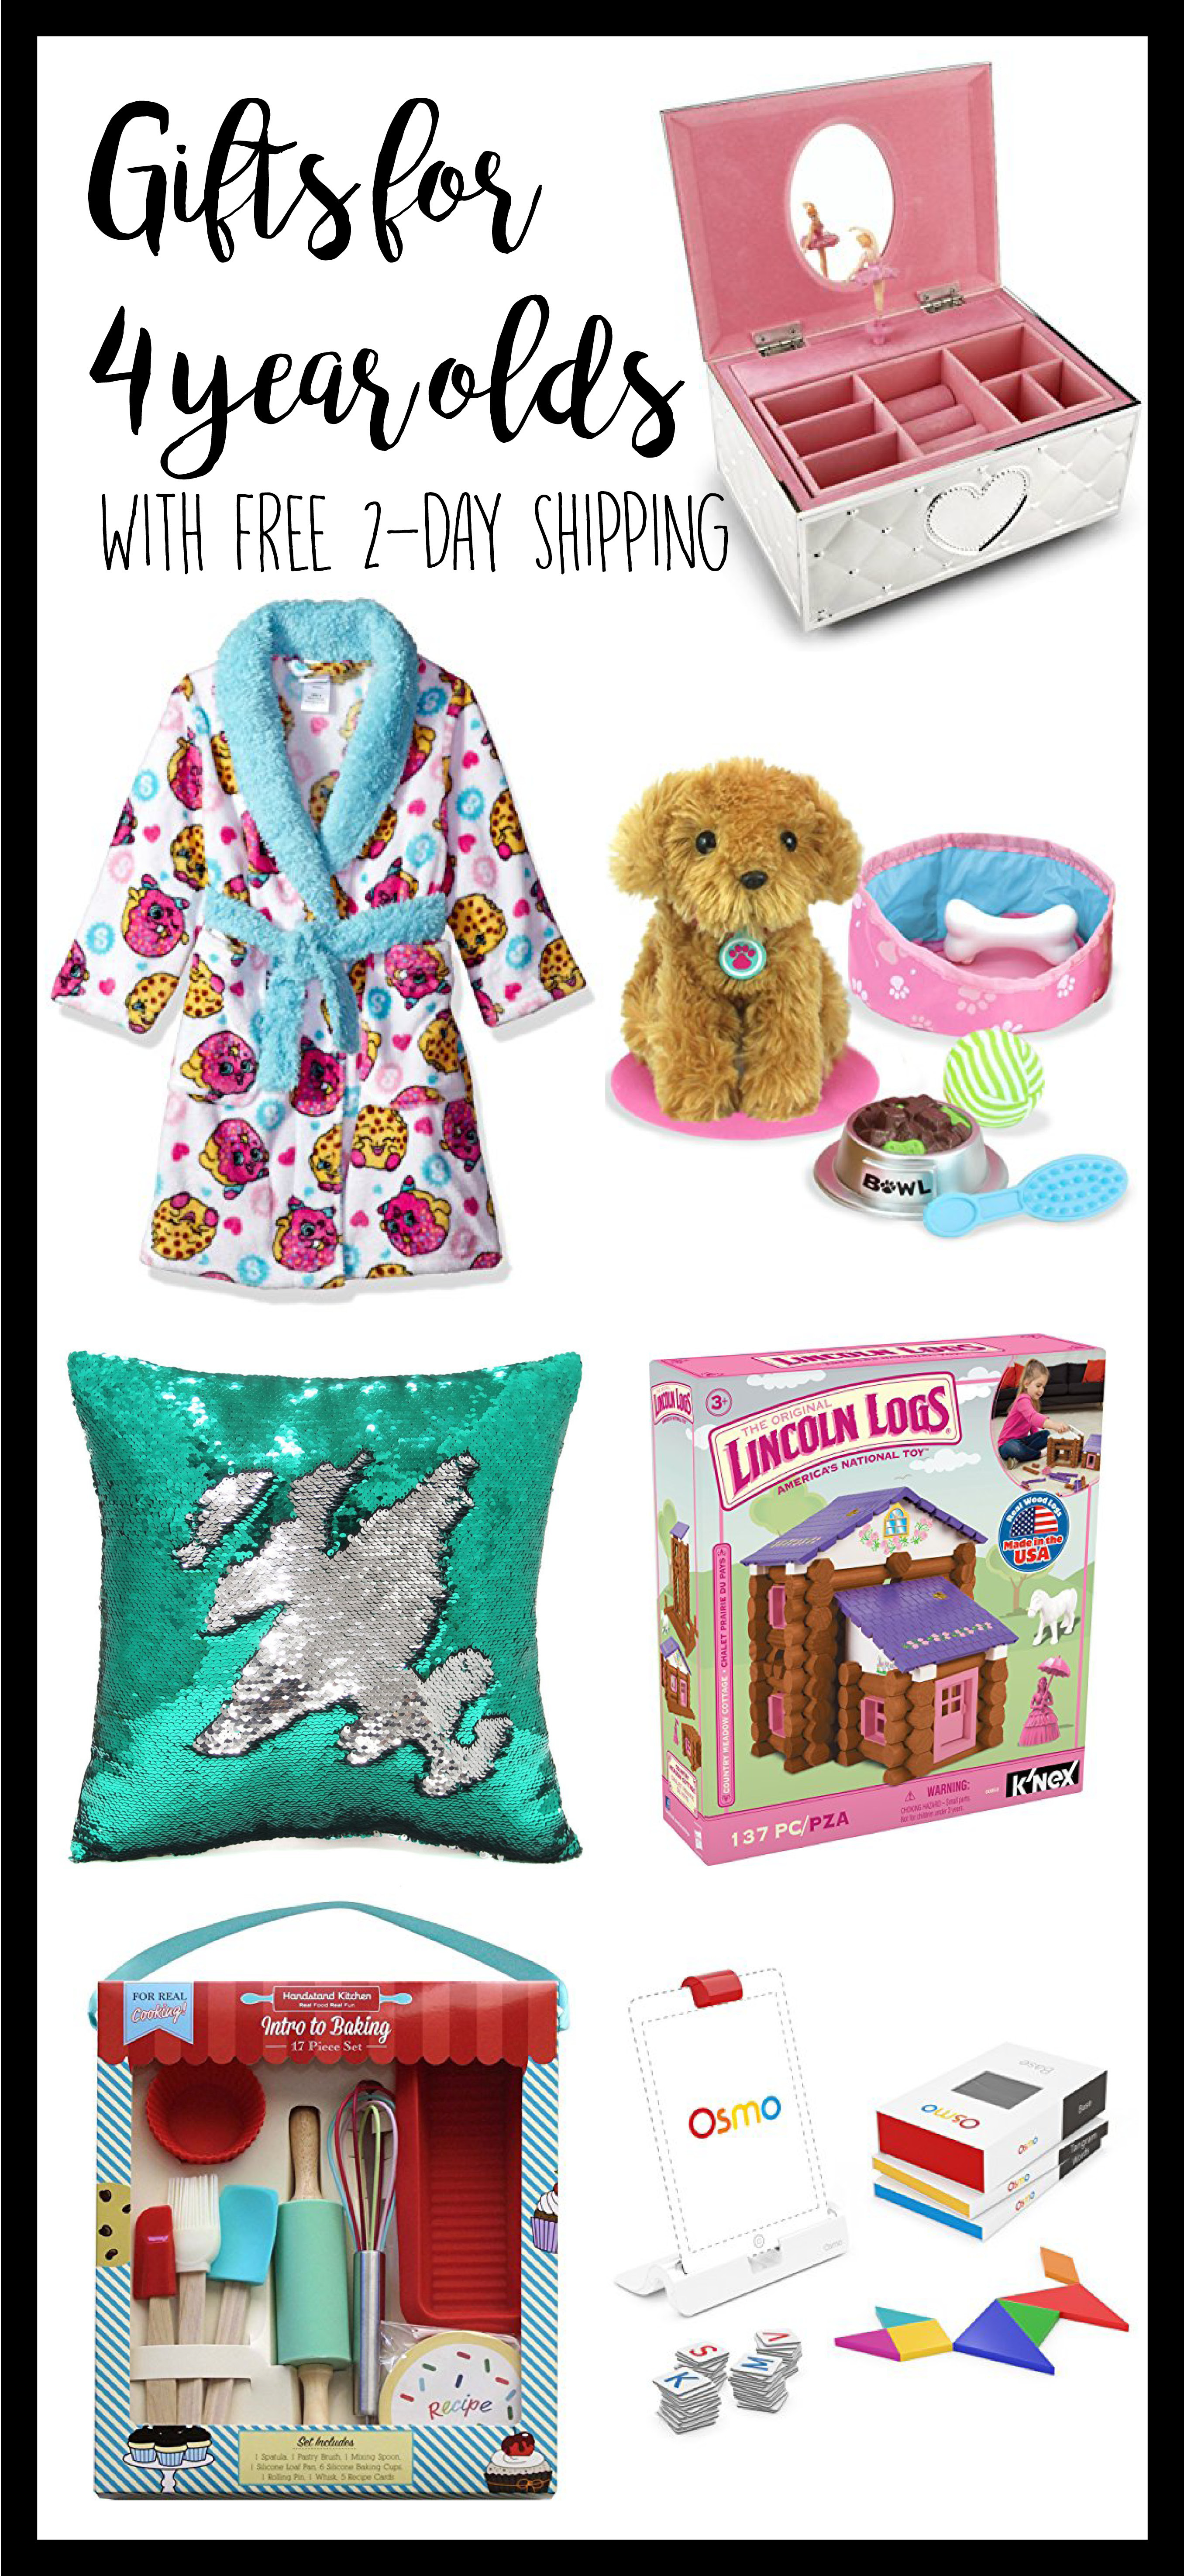 4 Year Old Christmas Gift Ideas
 4 Year Old Gift Ideas Gift ideas for 4 year old Girls